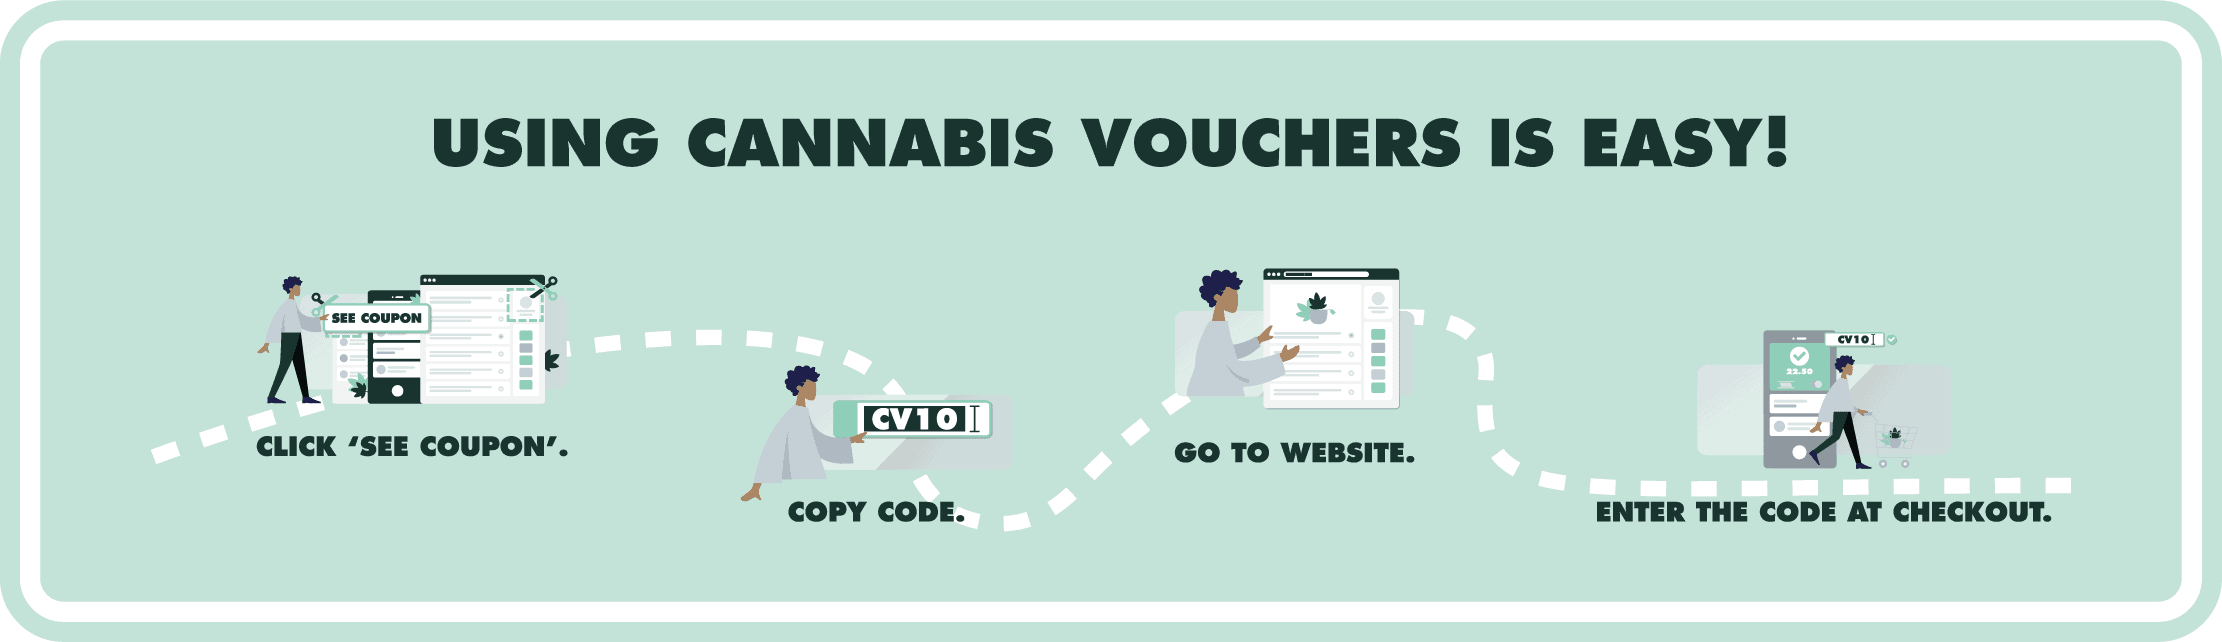 How to use Cannabis Vouchers coupon codes banner - 1. click 